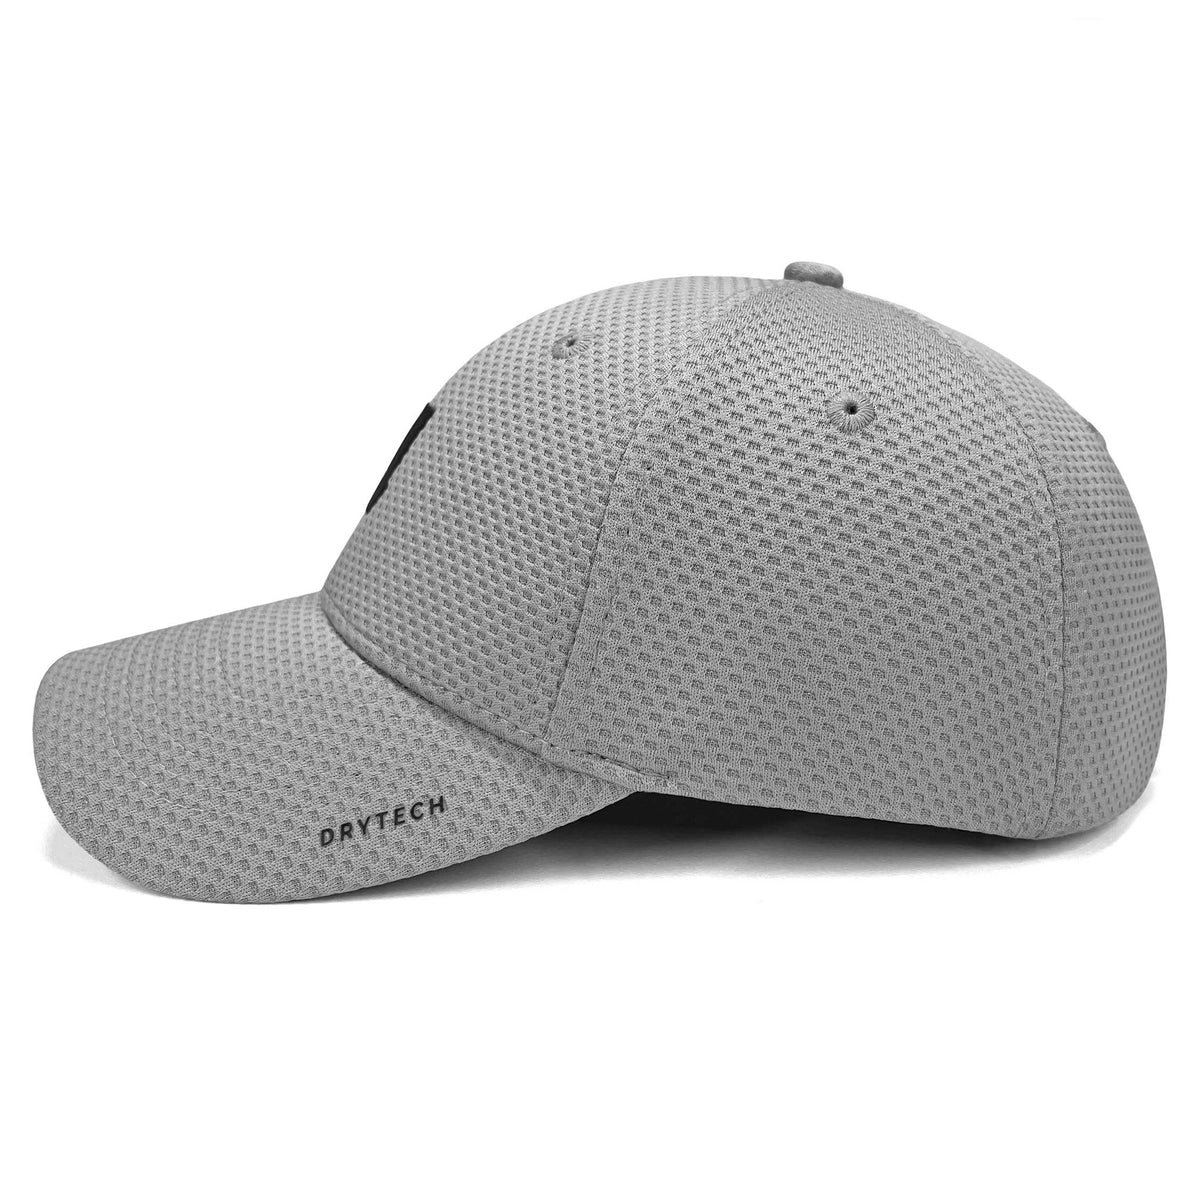 Mens Performance Trucker Hat - The Versa - Weightlifting Hat, Gym Hat -  King and Fifth Supply Co.